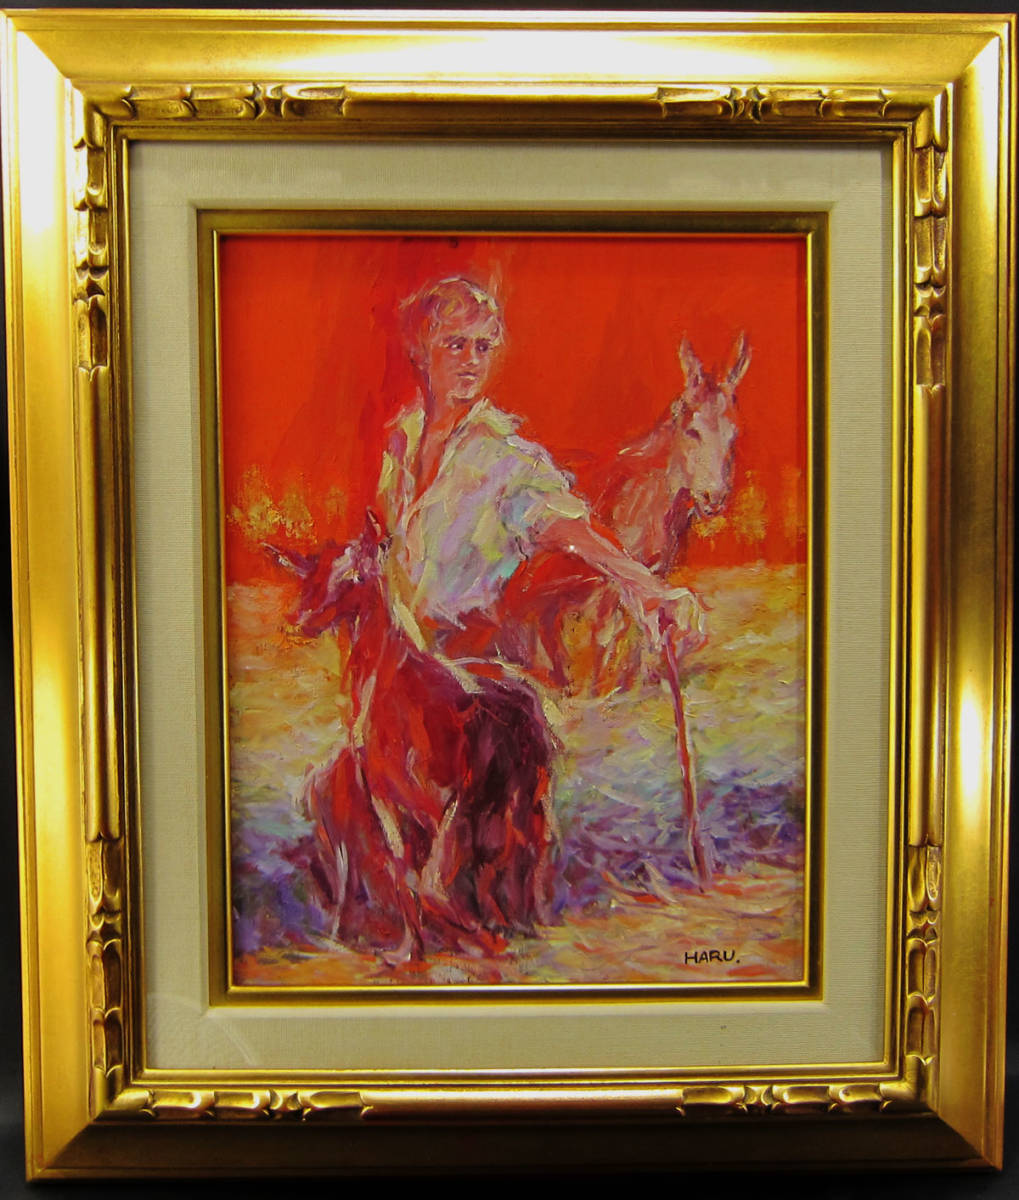 Haruo Endo Jose the Shepherd Boy Oil painting Guaranteed authentic F6 size Comes with a tarpaulin box, Painting, Oil painting, Portraits